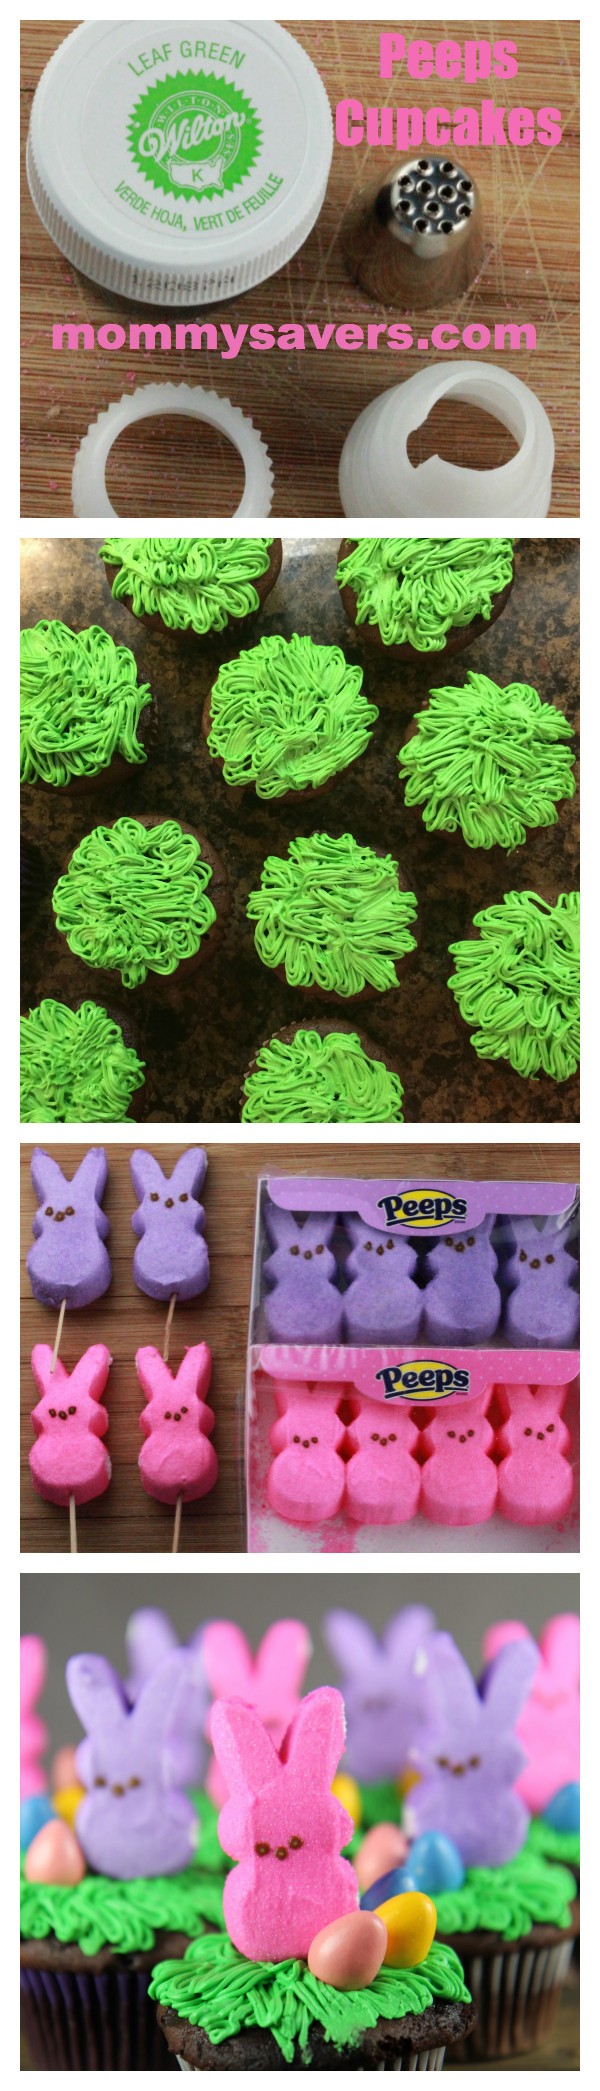 Easter Cupcakes With Peeps
 Easter Bunny Peeps Cupcakes Mommysavers